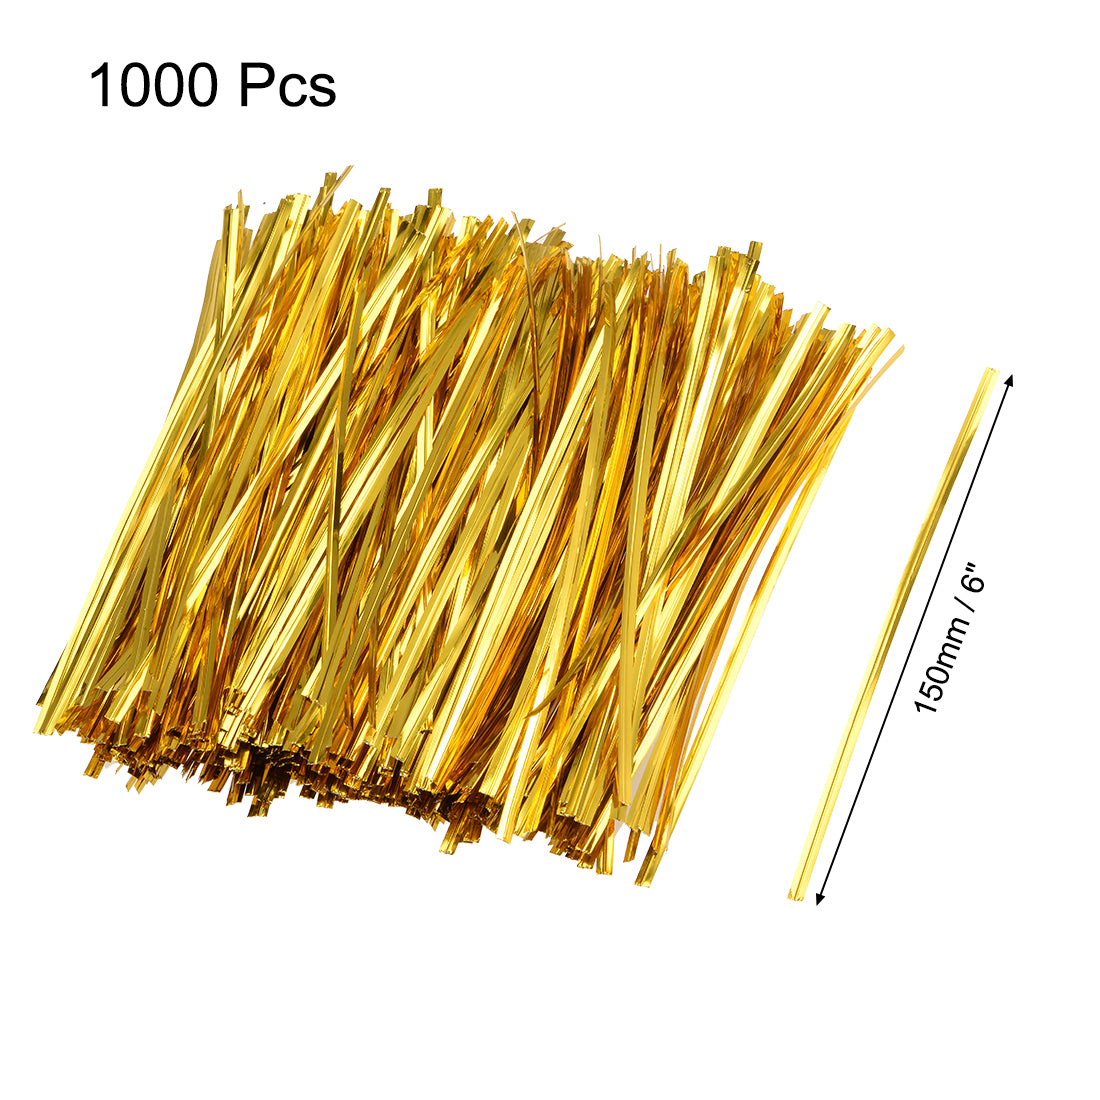 uxcell Uxcell Long Strong Twist Ties 5.9 Inches Quality Plastic Closure Tie for Tying Gift Bags Art Craft Ties Manage Cords Golden 1000pcs